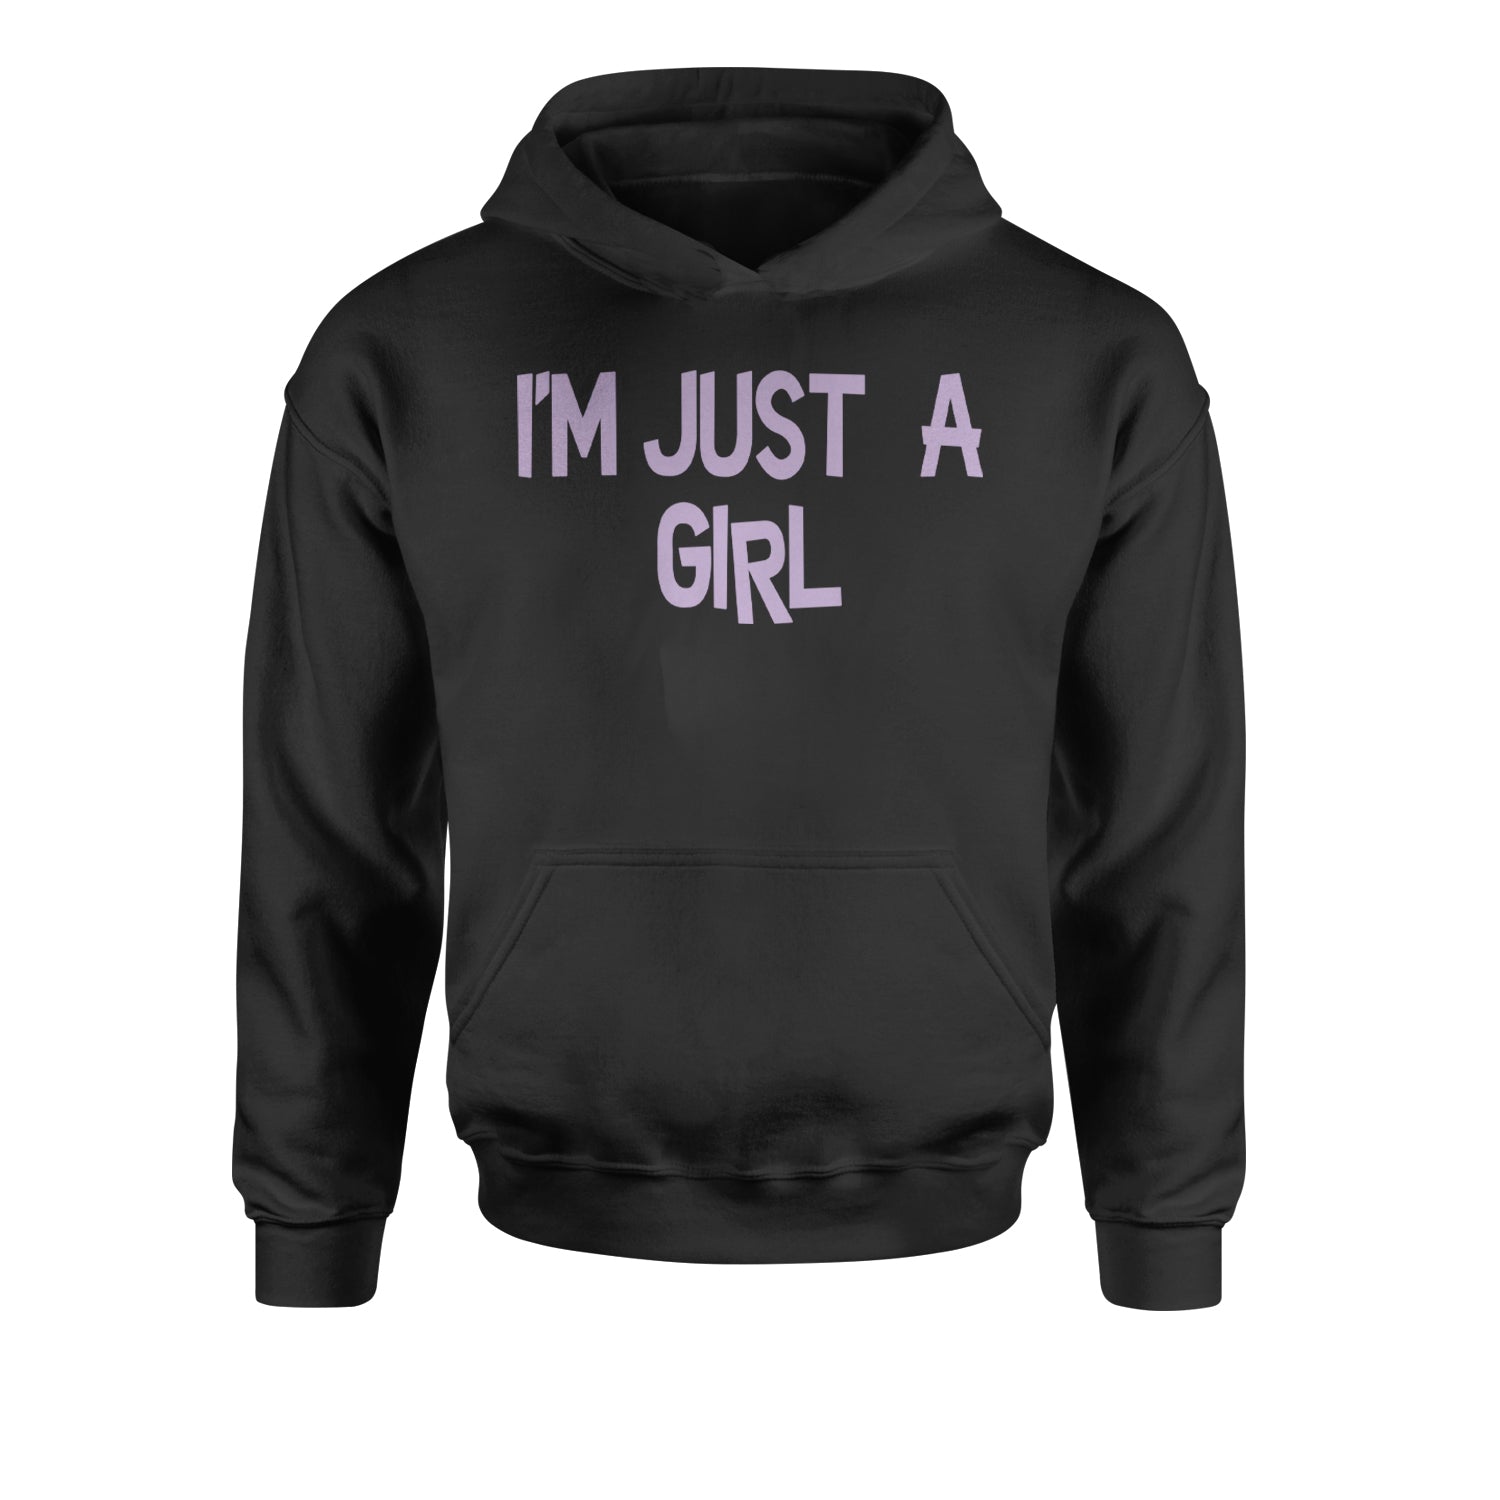 I'm Just A Girl Guts Music Youth-Sized Hoodie